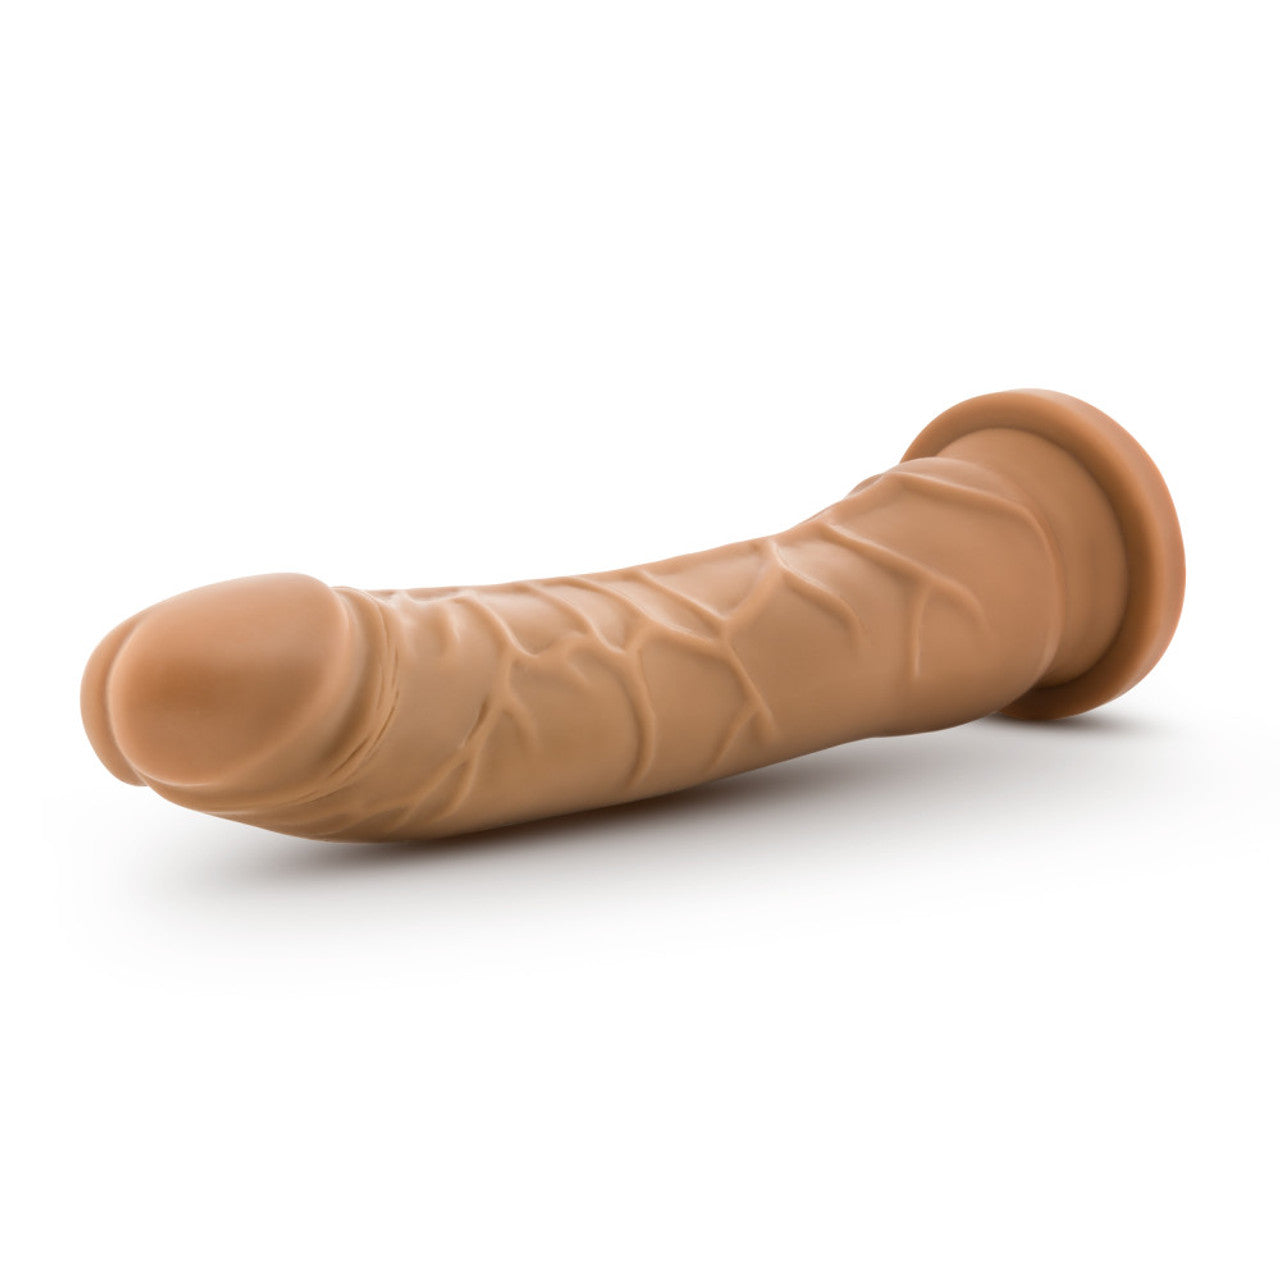 8 Inch Dong with Suction Cup - Mocha - Thorn & Feather Sex Toy Canada